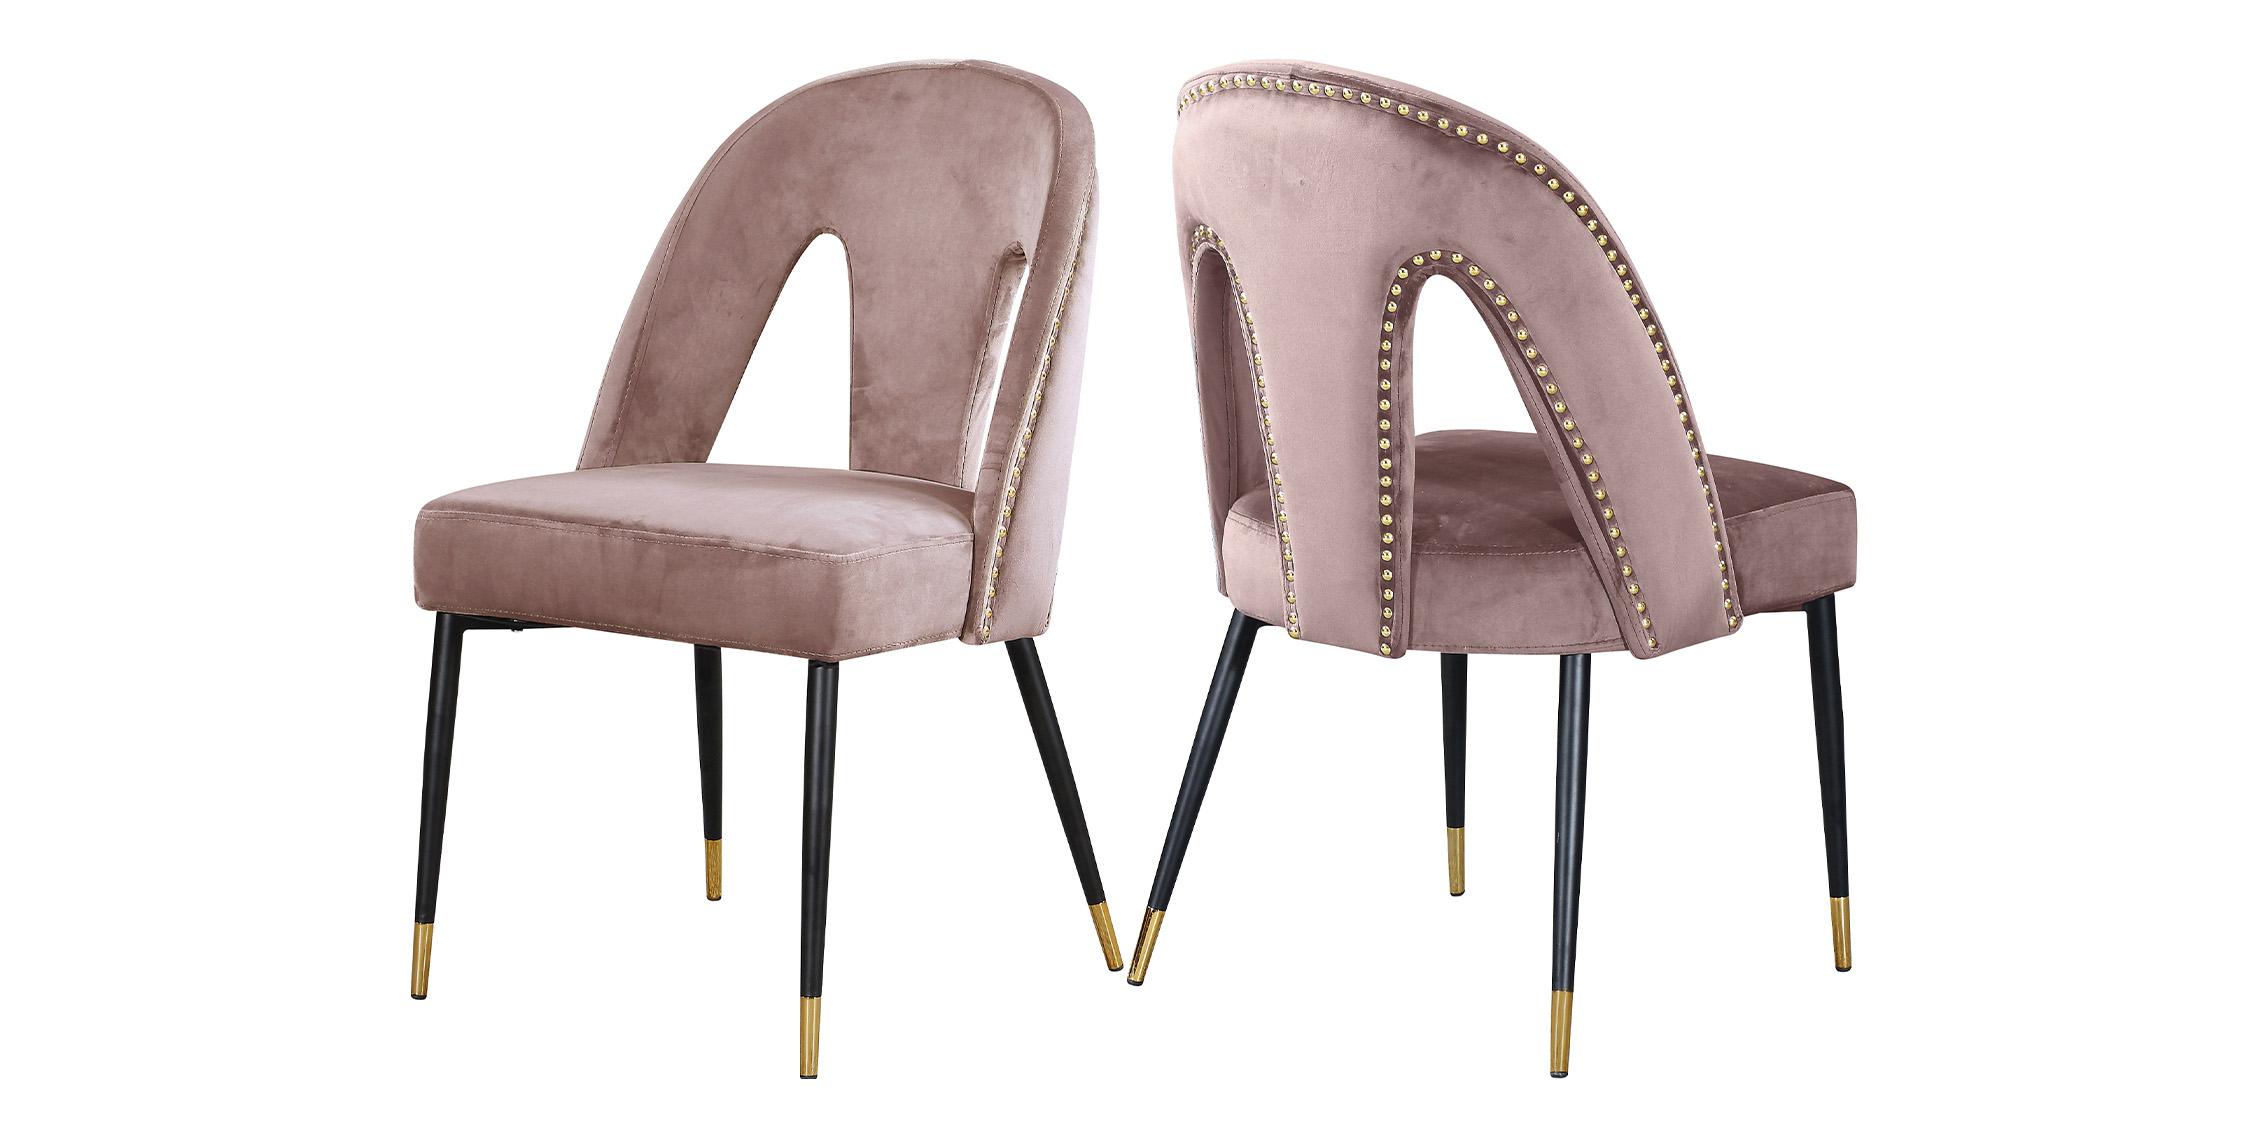 Contemporary Dining Chair Set AKOYA 794Pink-C 794Pink-C-Set-2 in Pink Velvet